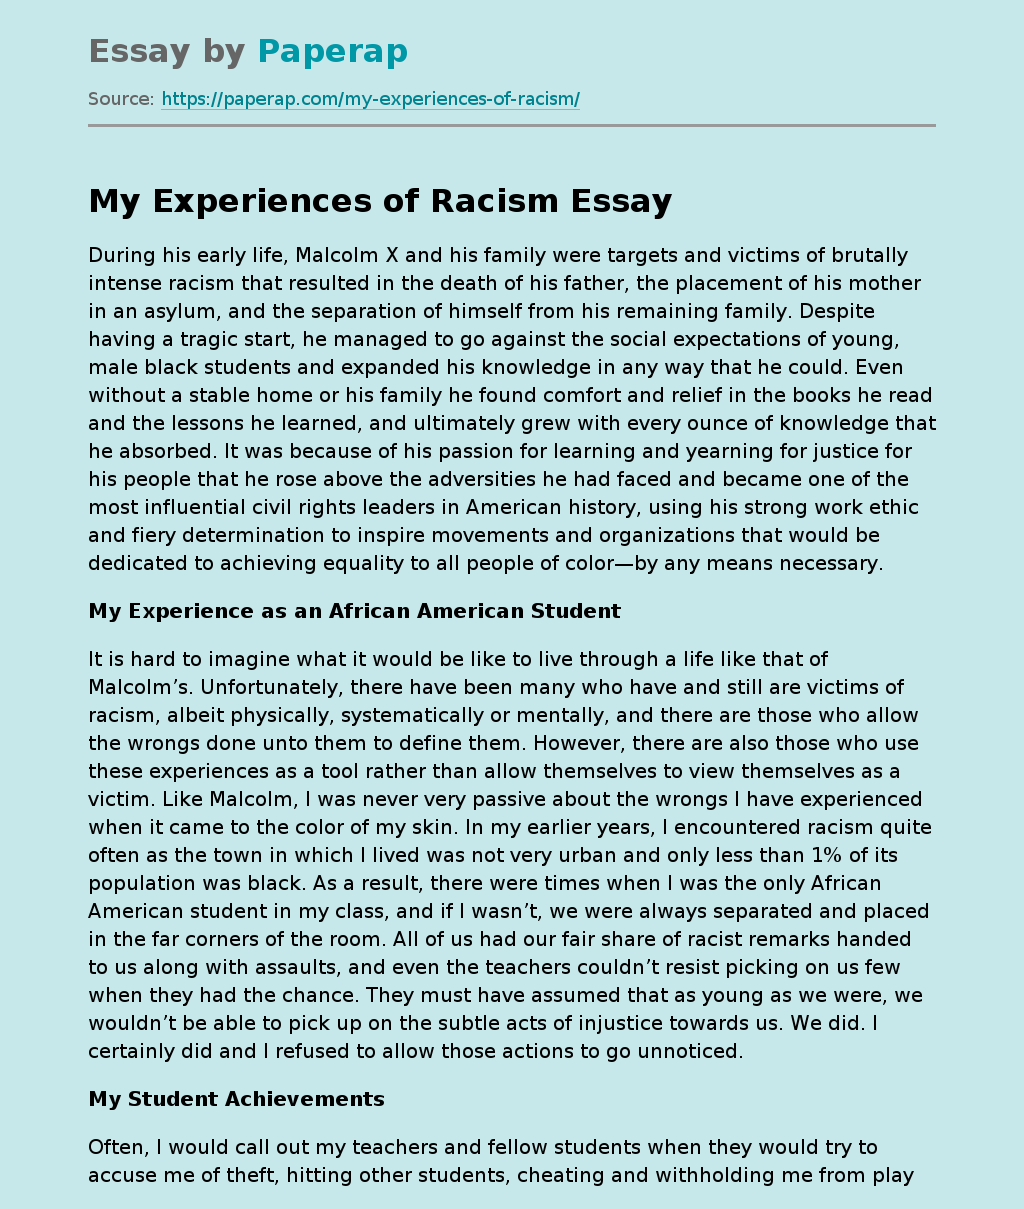 My Experiences of Racism